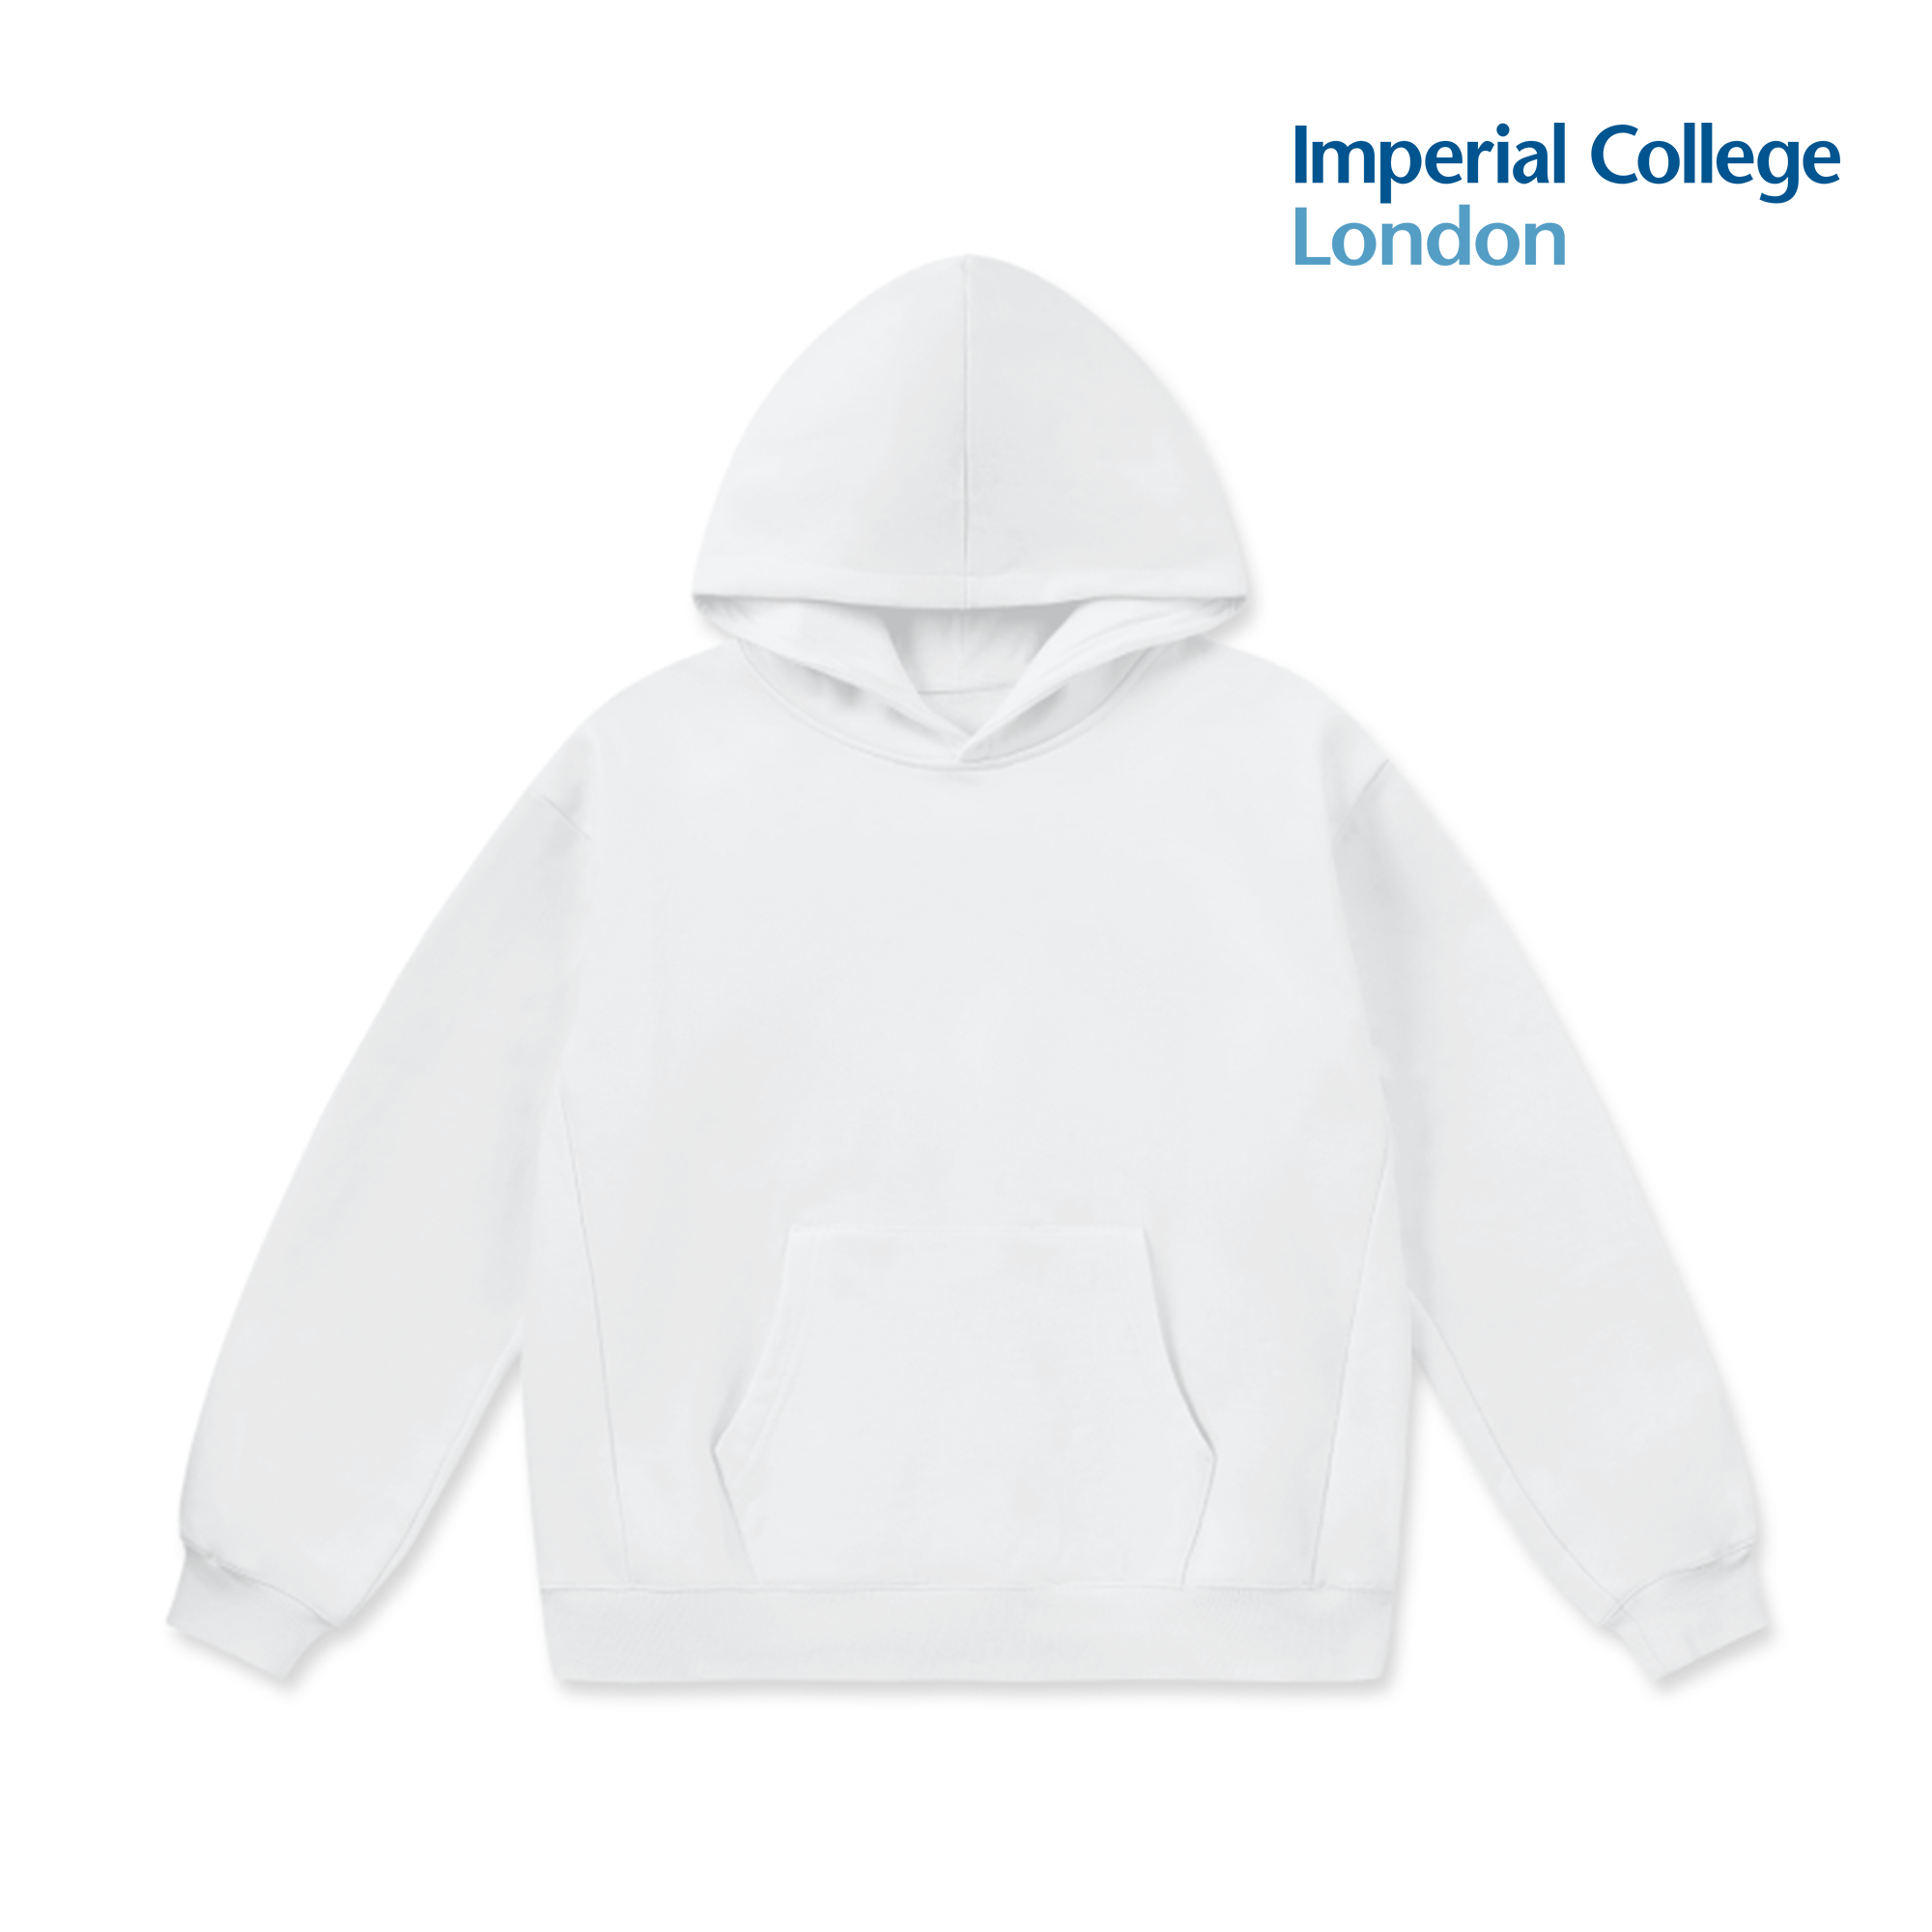 LCC Super Weighted Hoodie - Imperial College London (Modern)